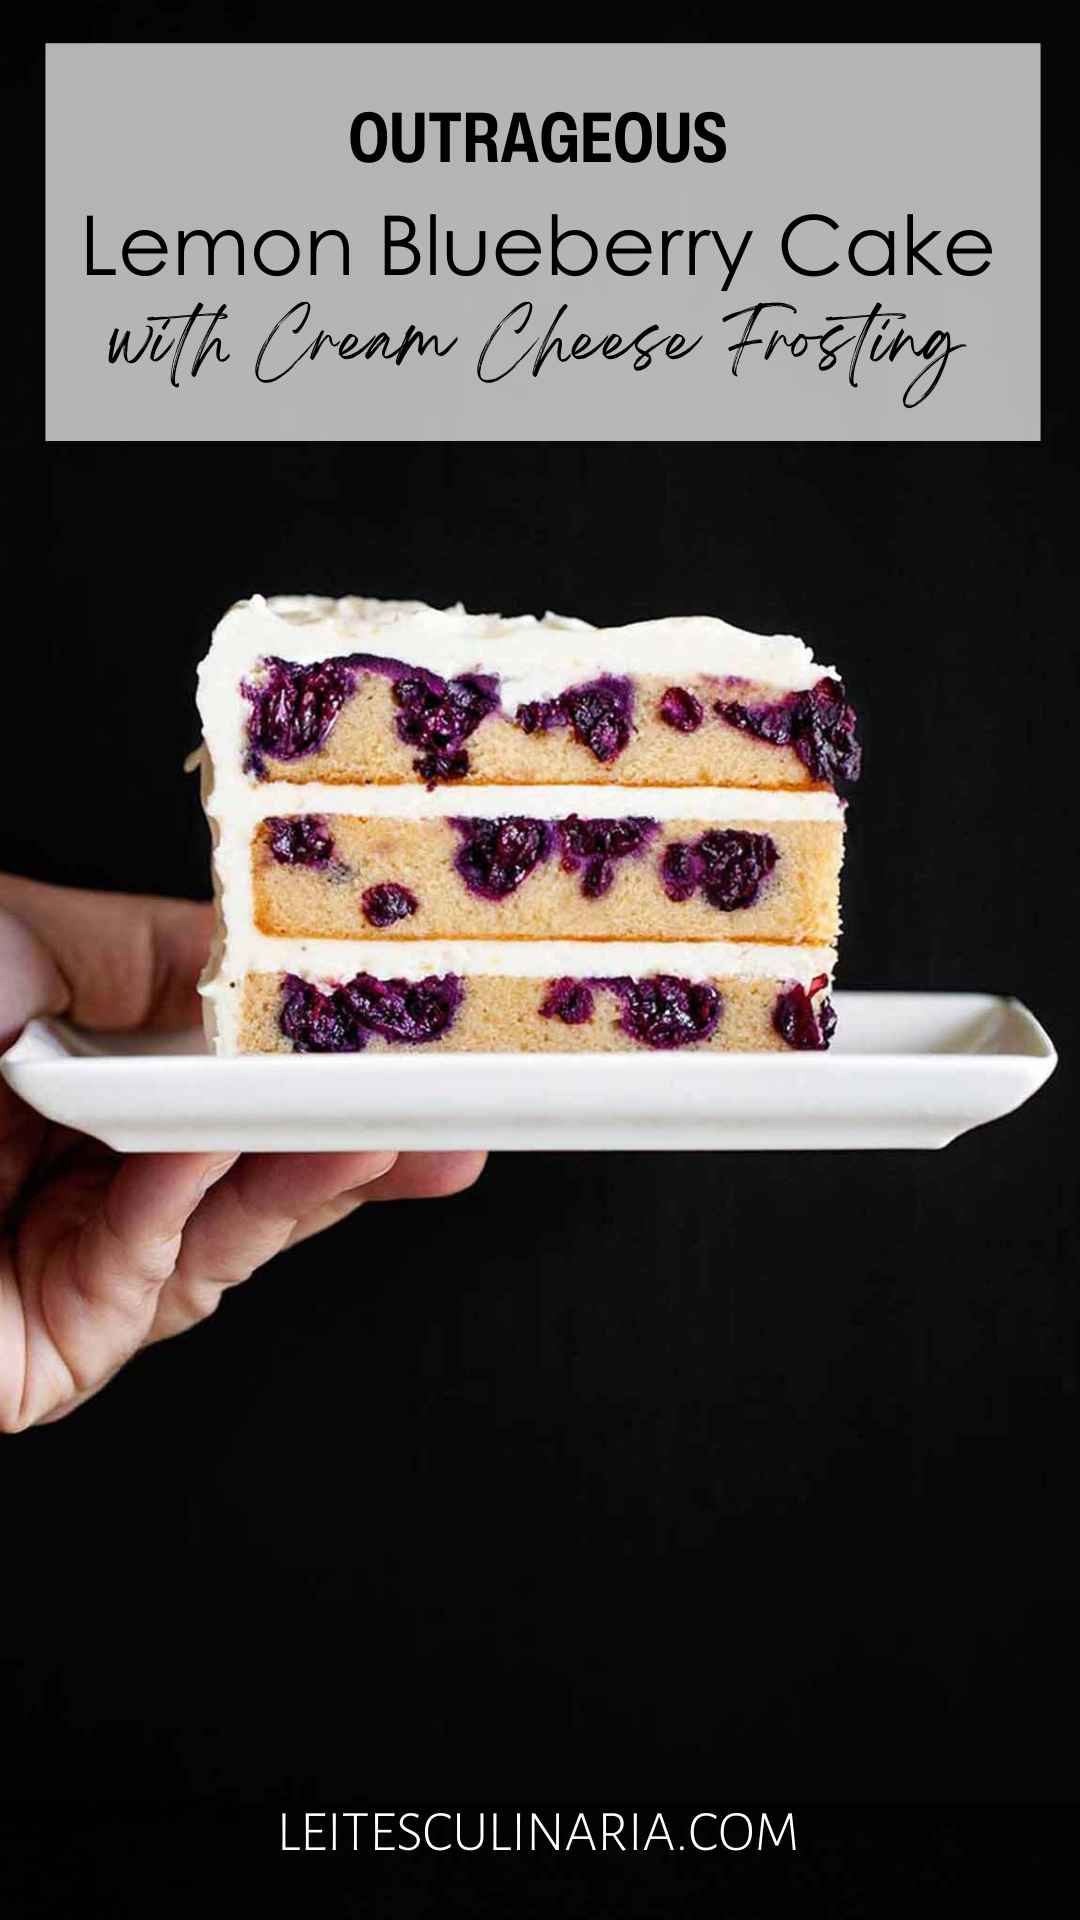 A person holding a slice of three layer blueberry lemon cake with cream cheese frosting on a white rectangular plate.